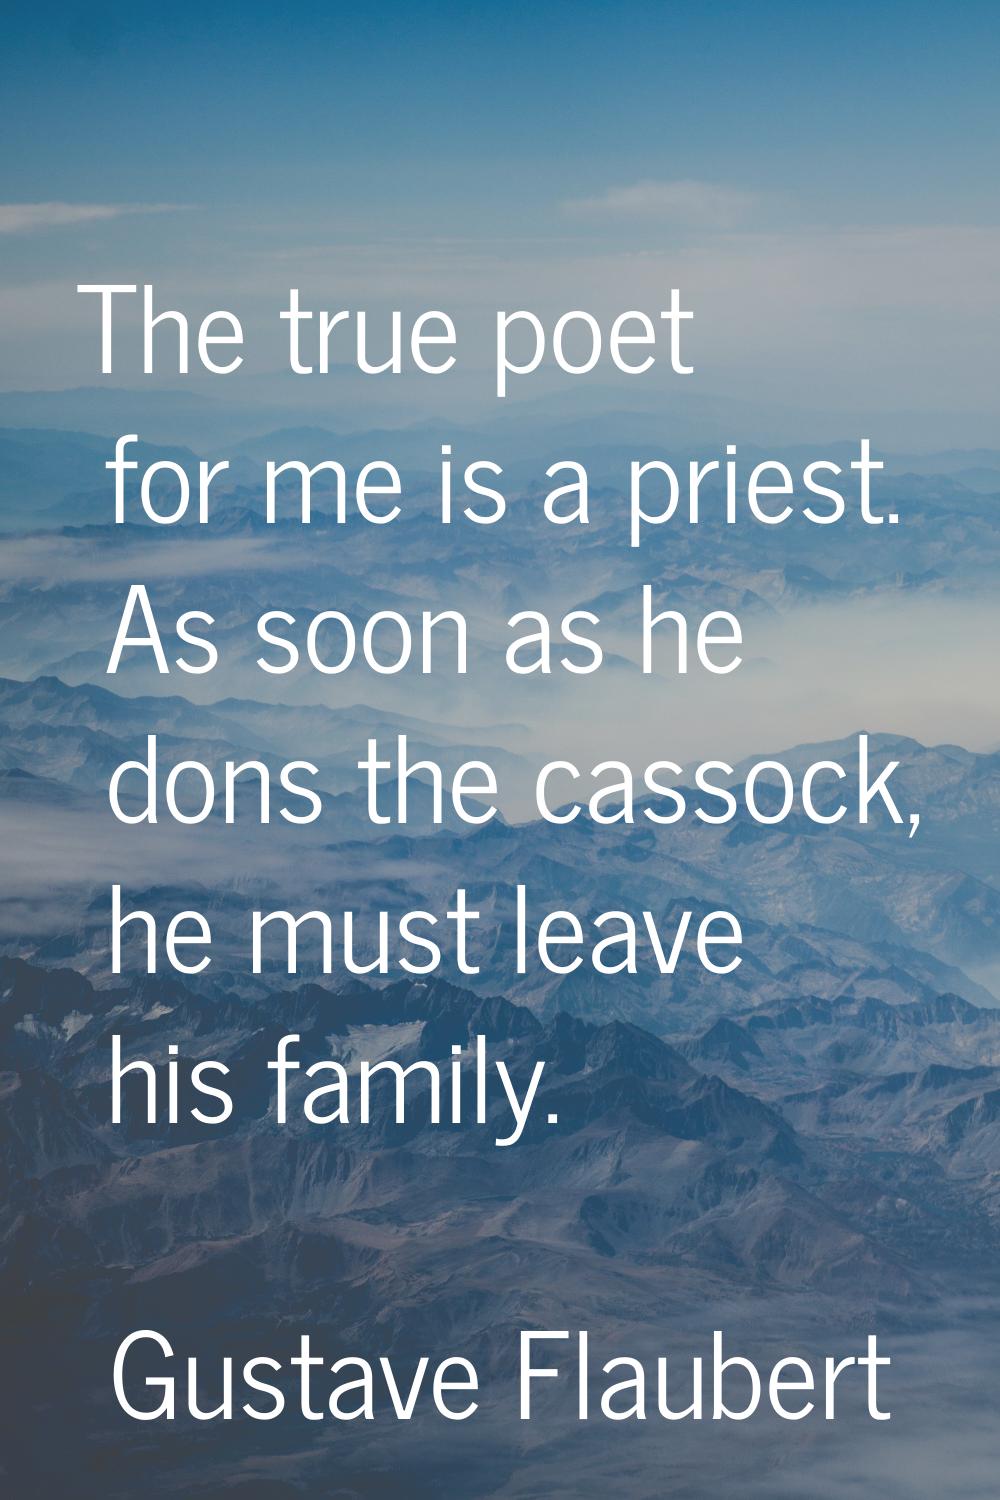 The true poet for me is a priest. As soon as he dons the cassock, he must leave his family.